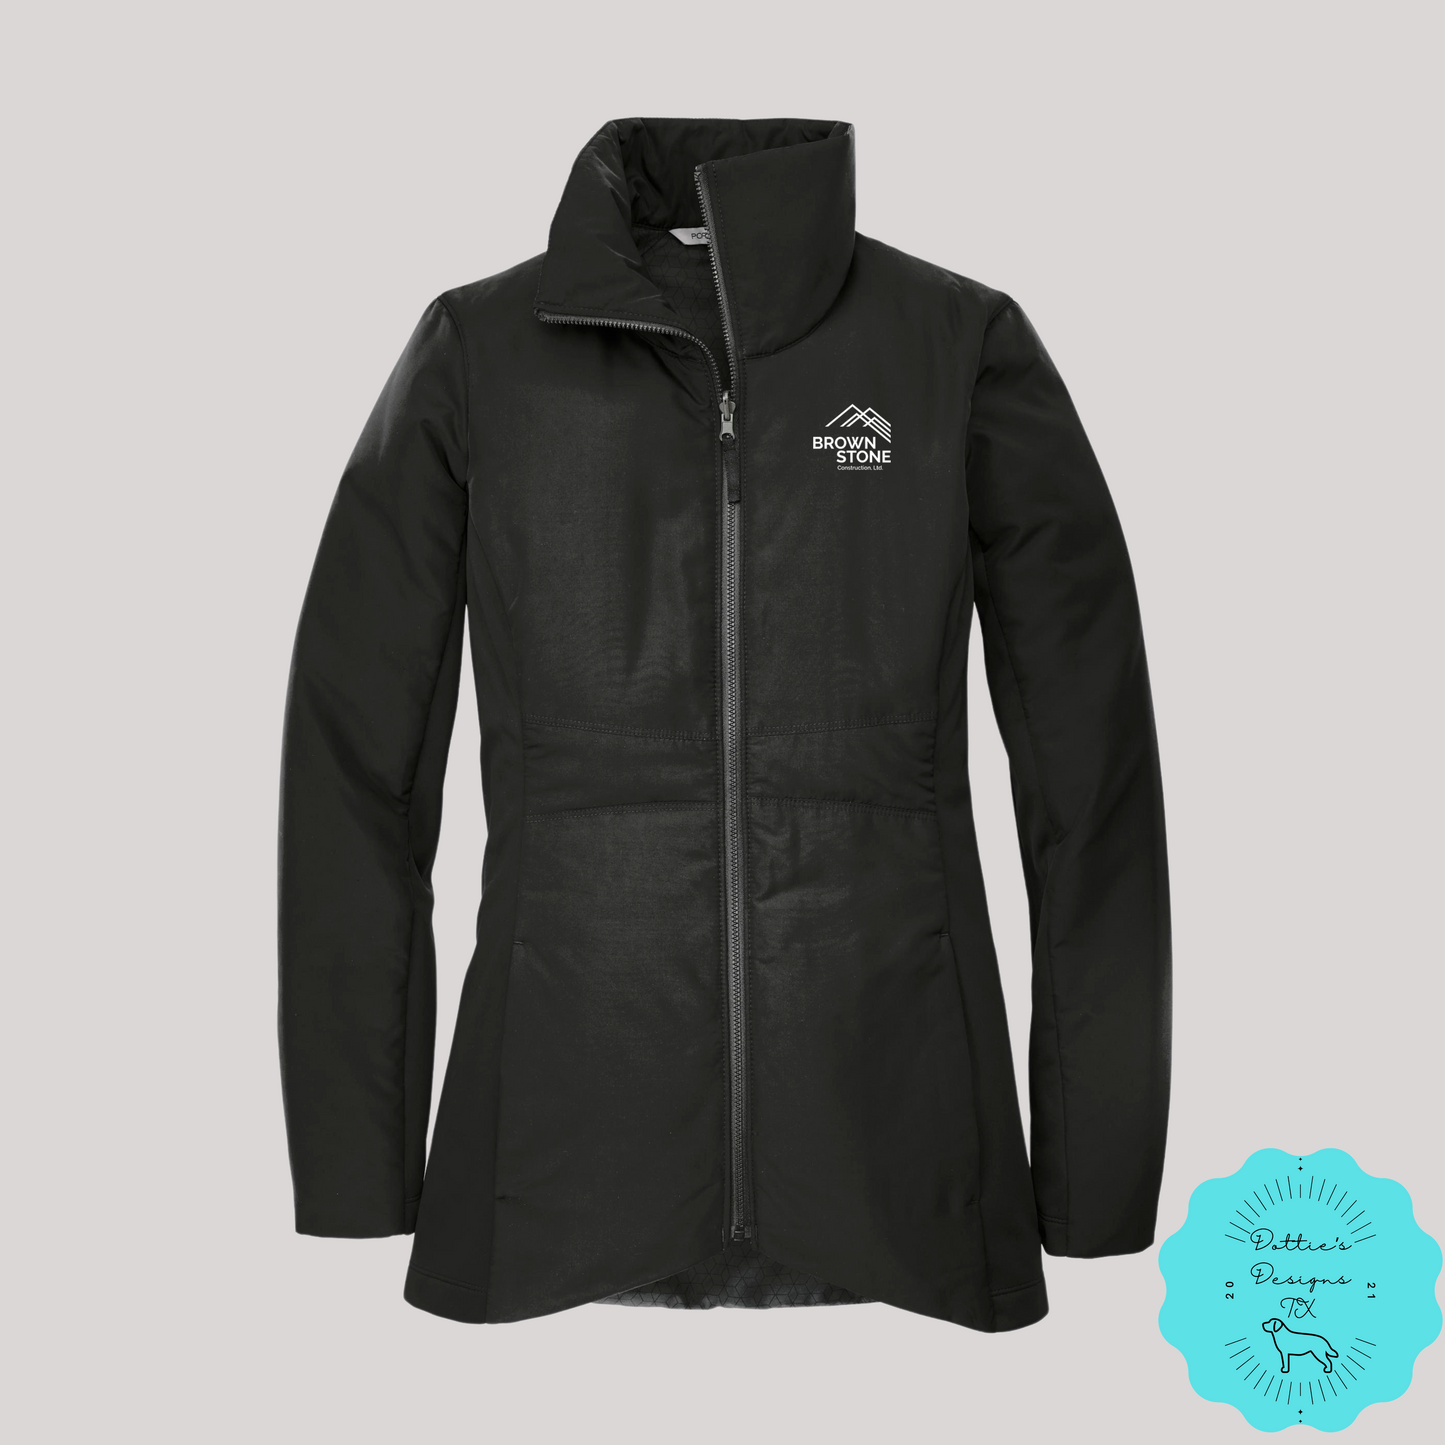 Ladies Brownstone Construction, LTD. Embroidered Ladies Collective Insulated Jacket